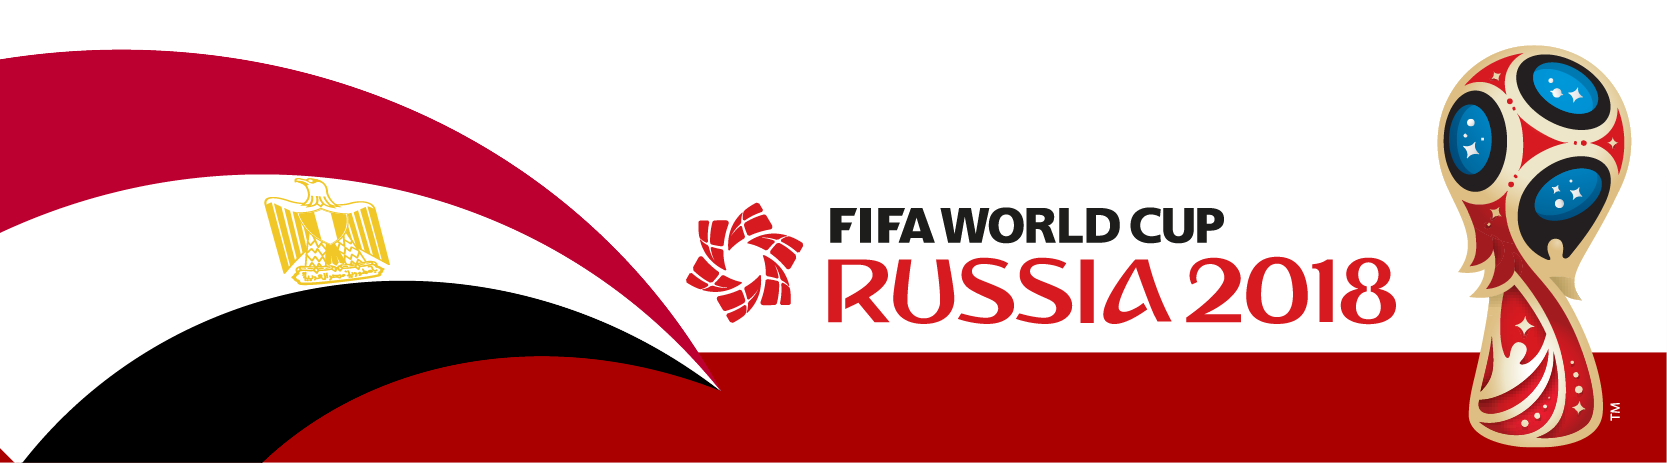 2018 FIFA World Cup Download Transparent PNG Image